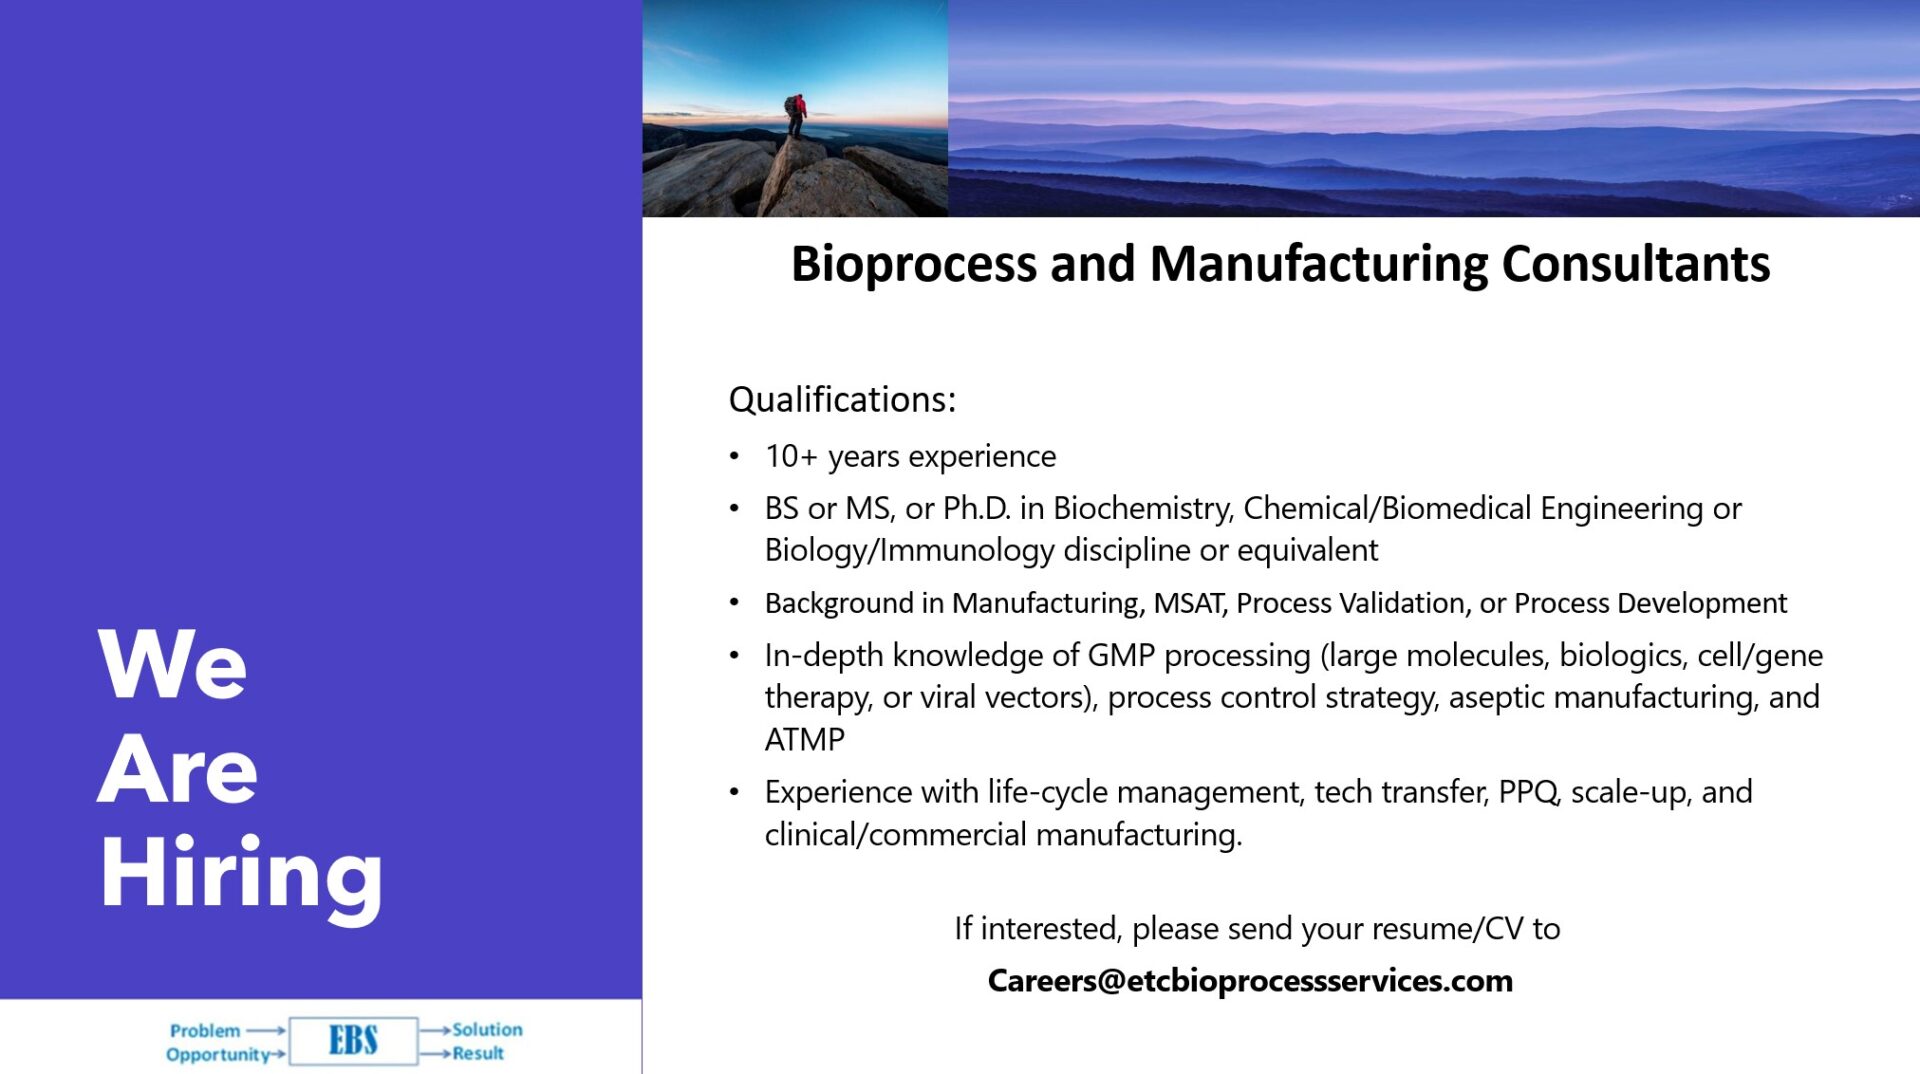 Bioprocess and Manufacturing Consultants